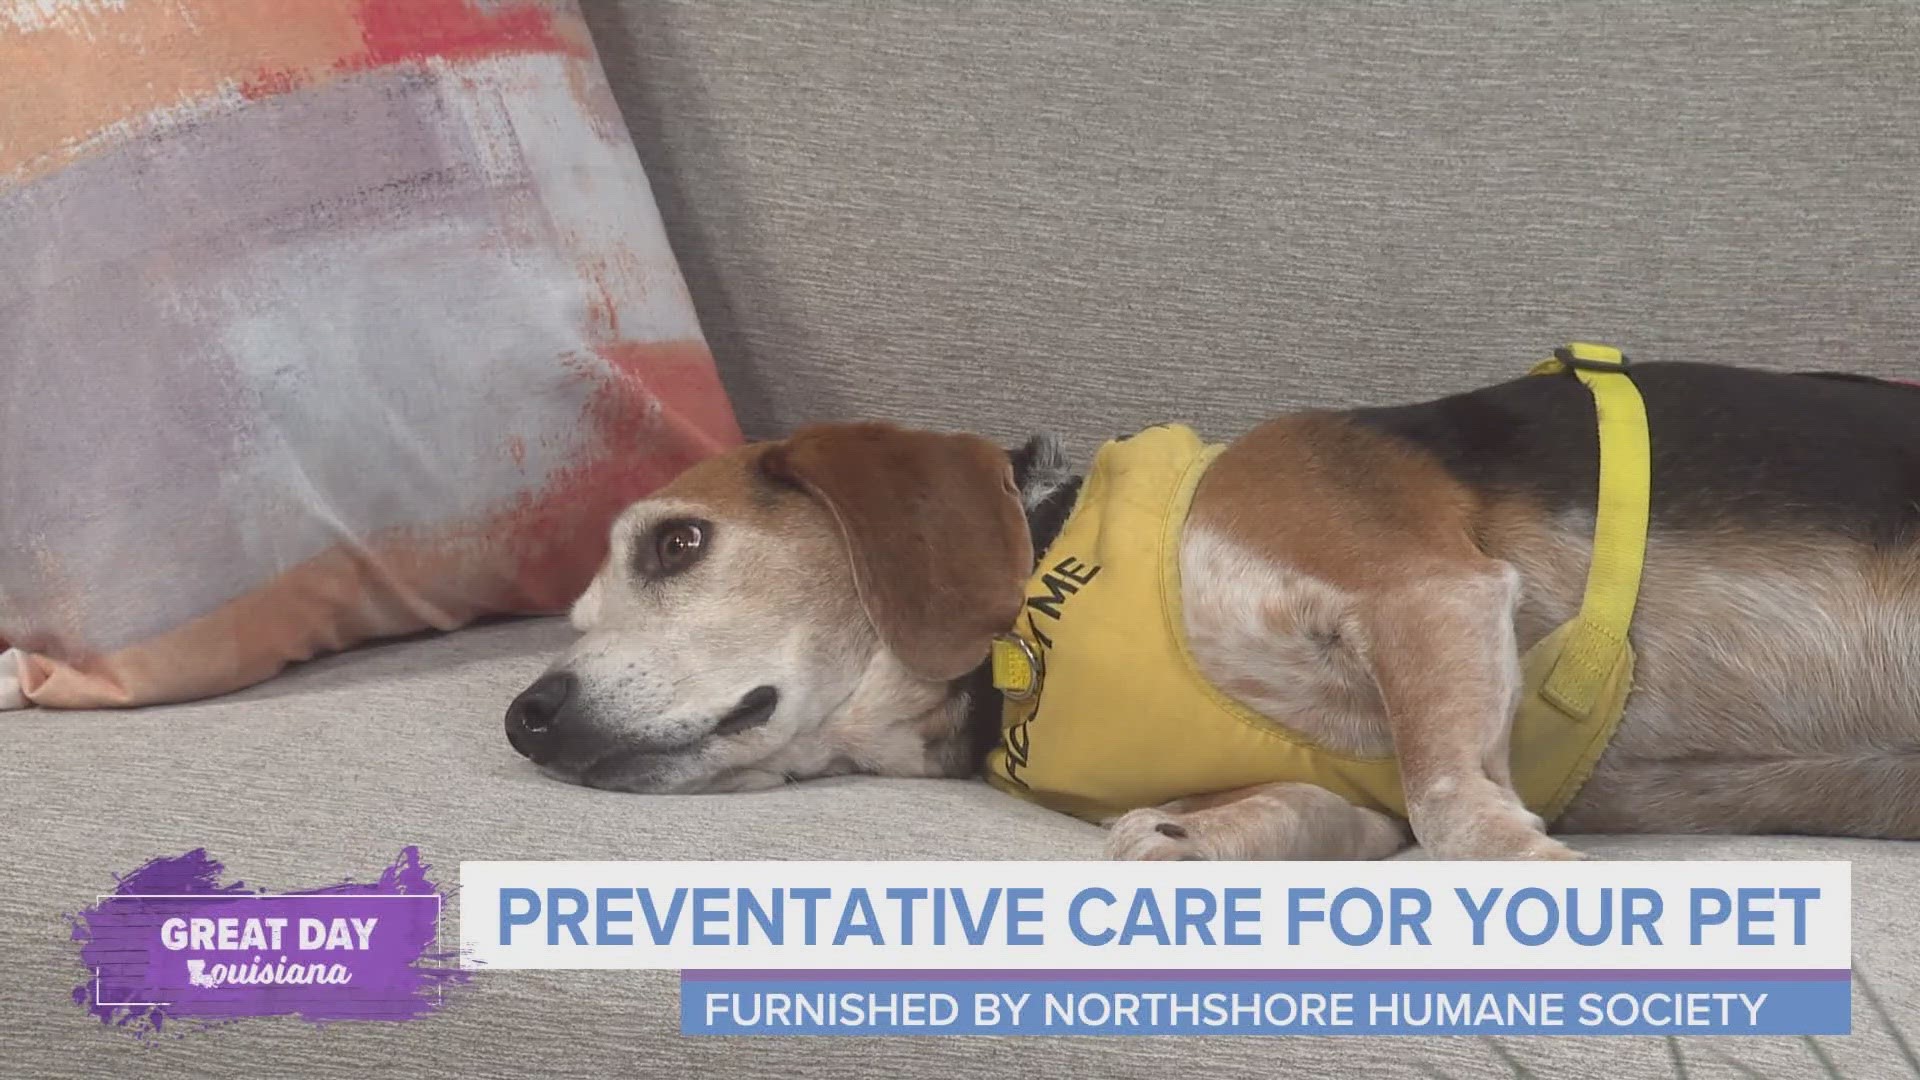 The Northshore Humane Society talks about preventative health care for your pet.